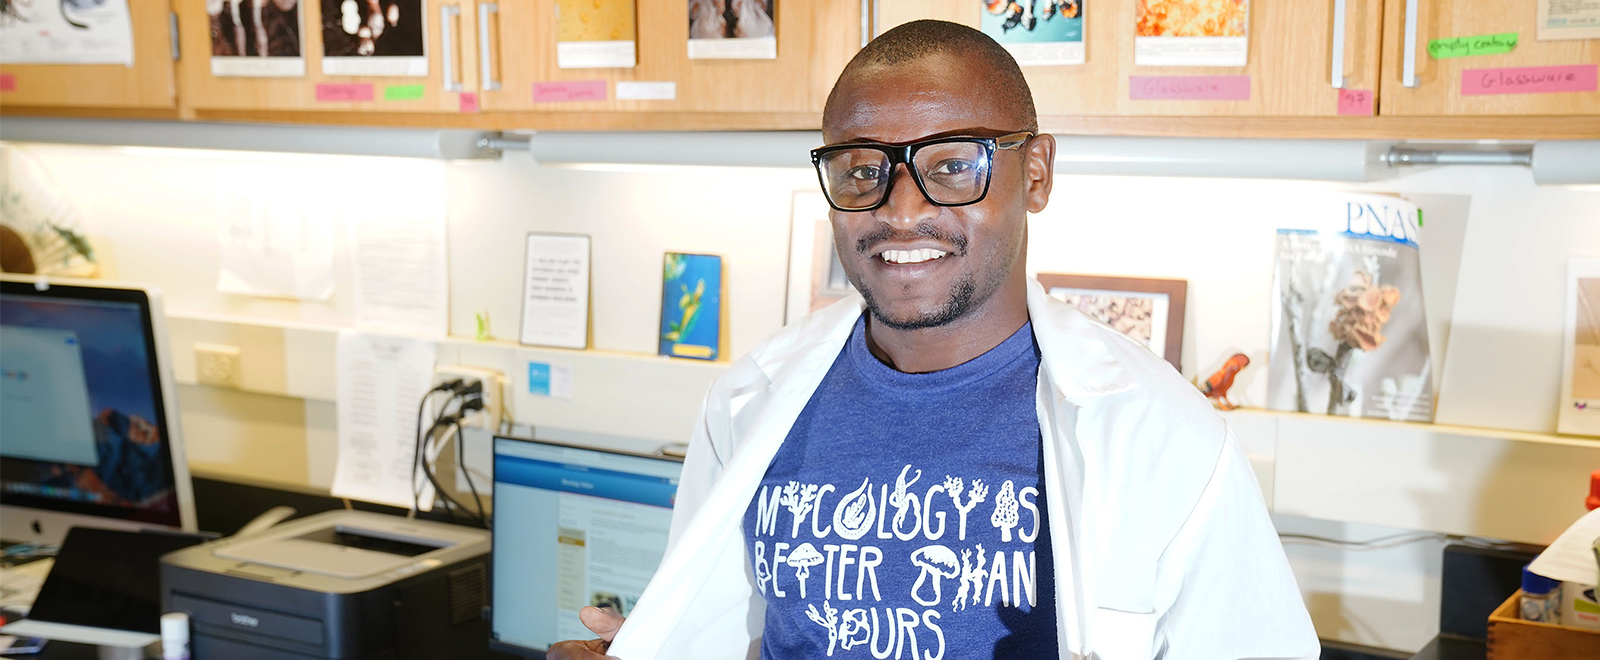 Blaise Jumbam, a Ph.D. candidate in the Department of Botany and Plant Pathology